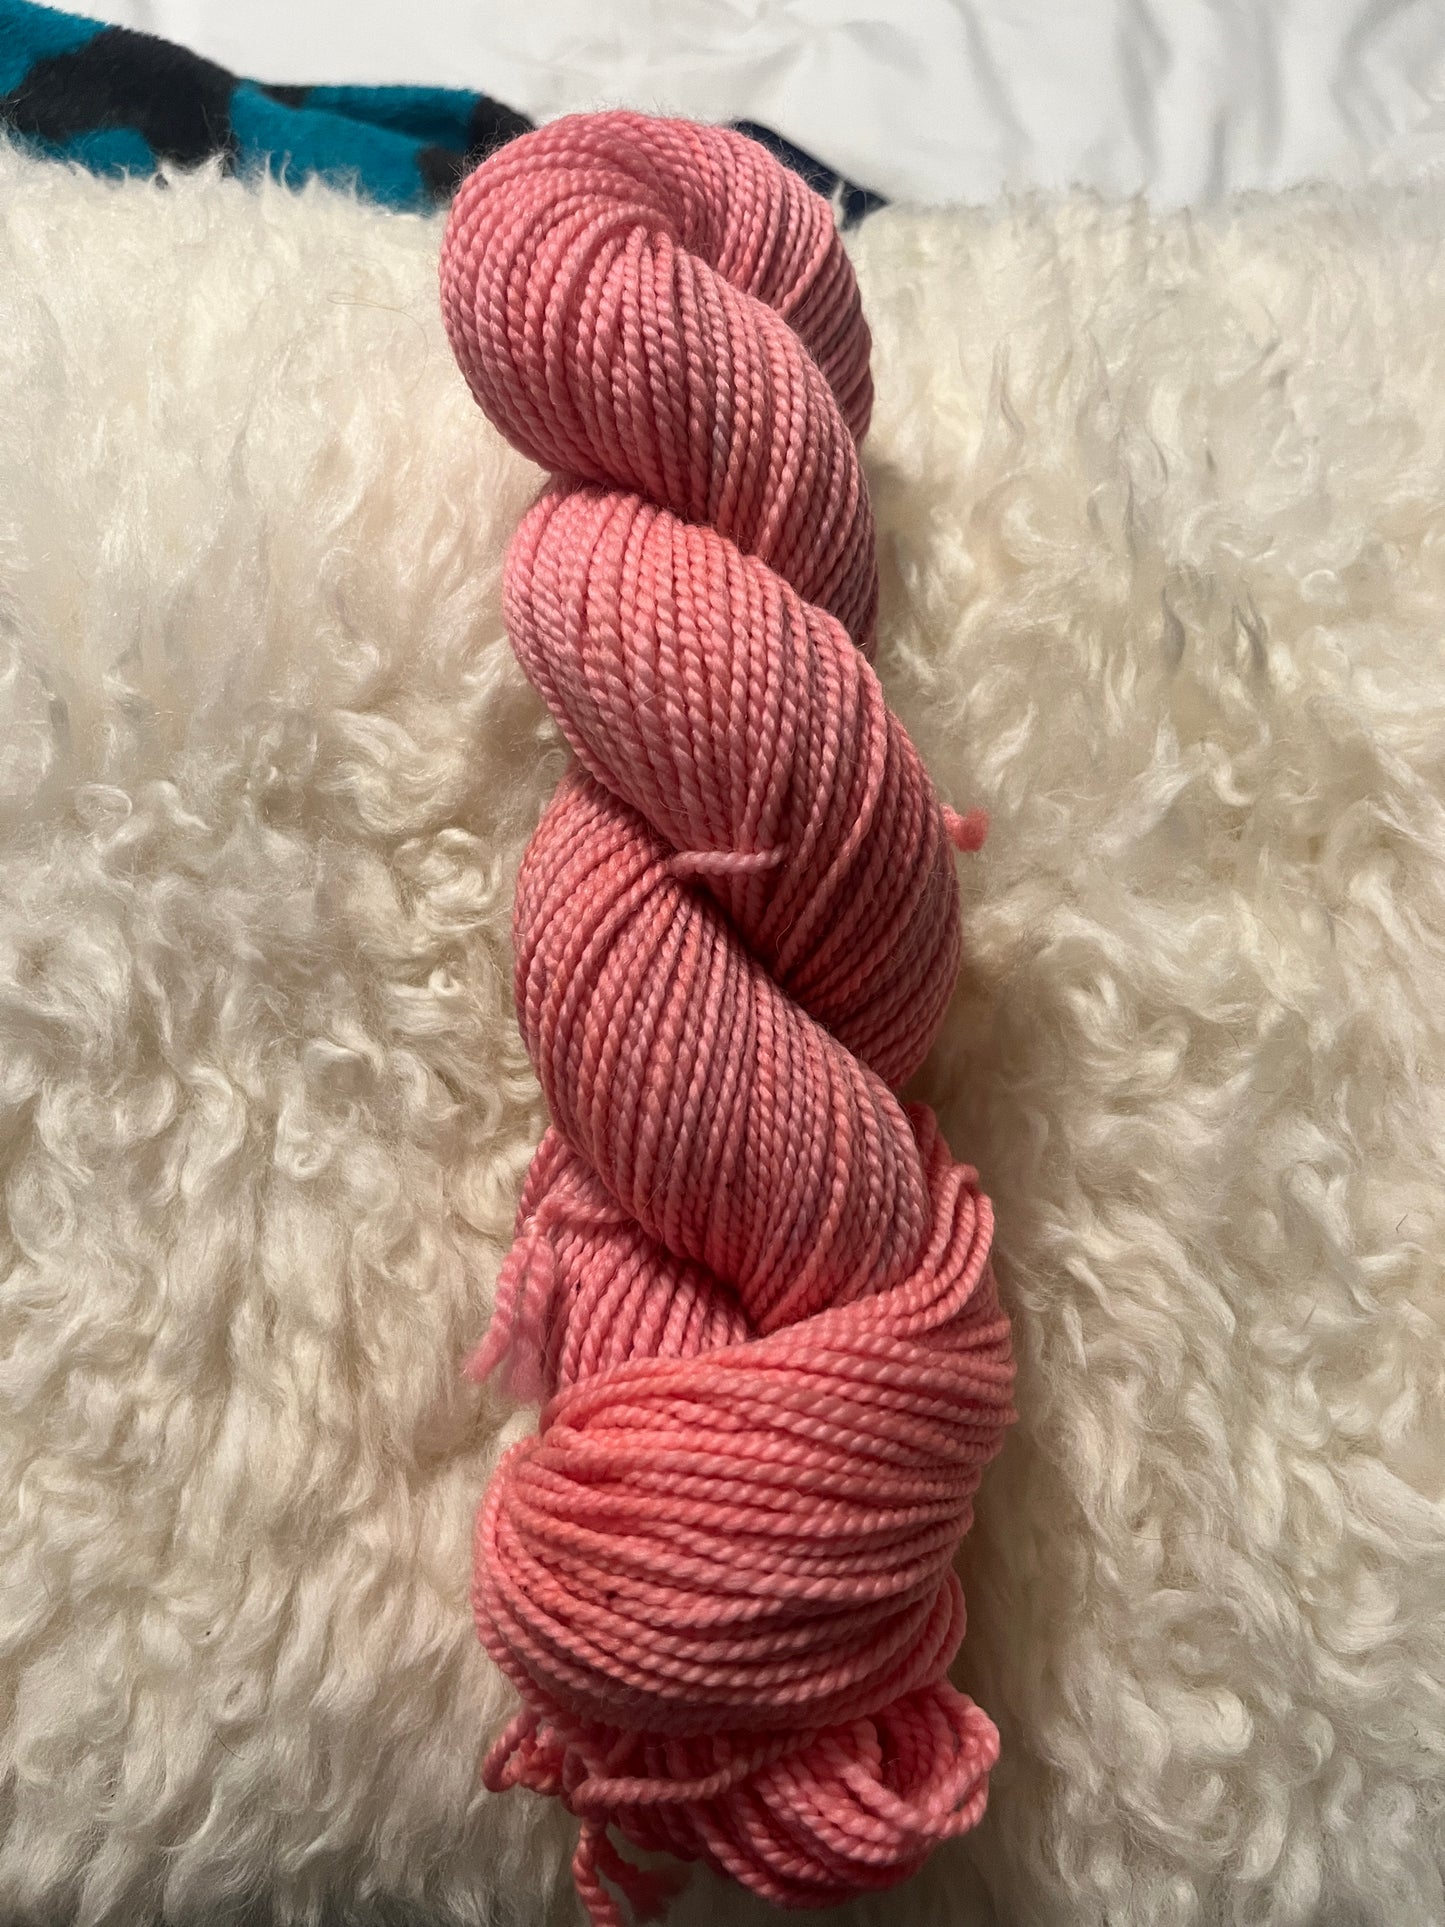 OOAK - Cozy Worsted - Ready to Ship